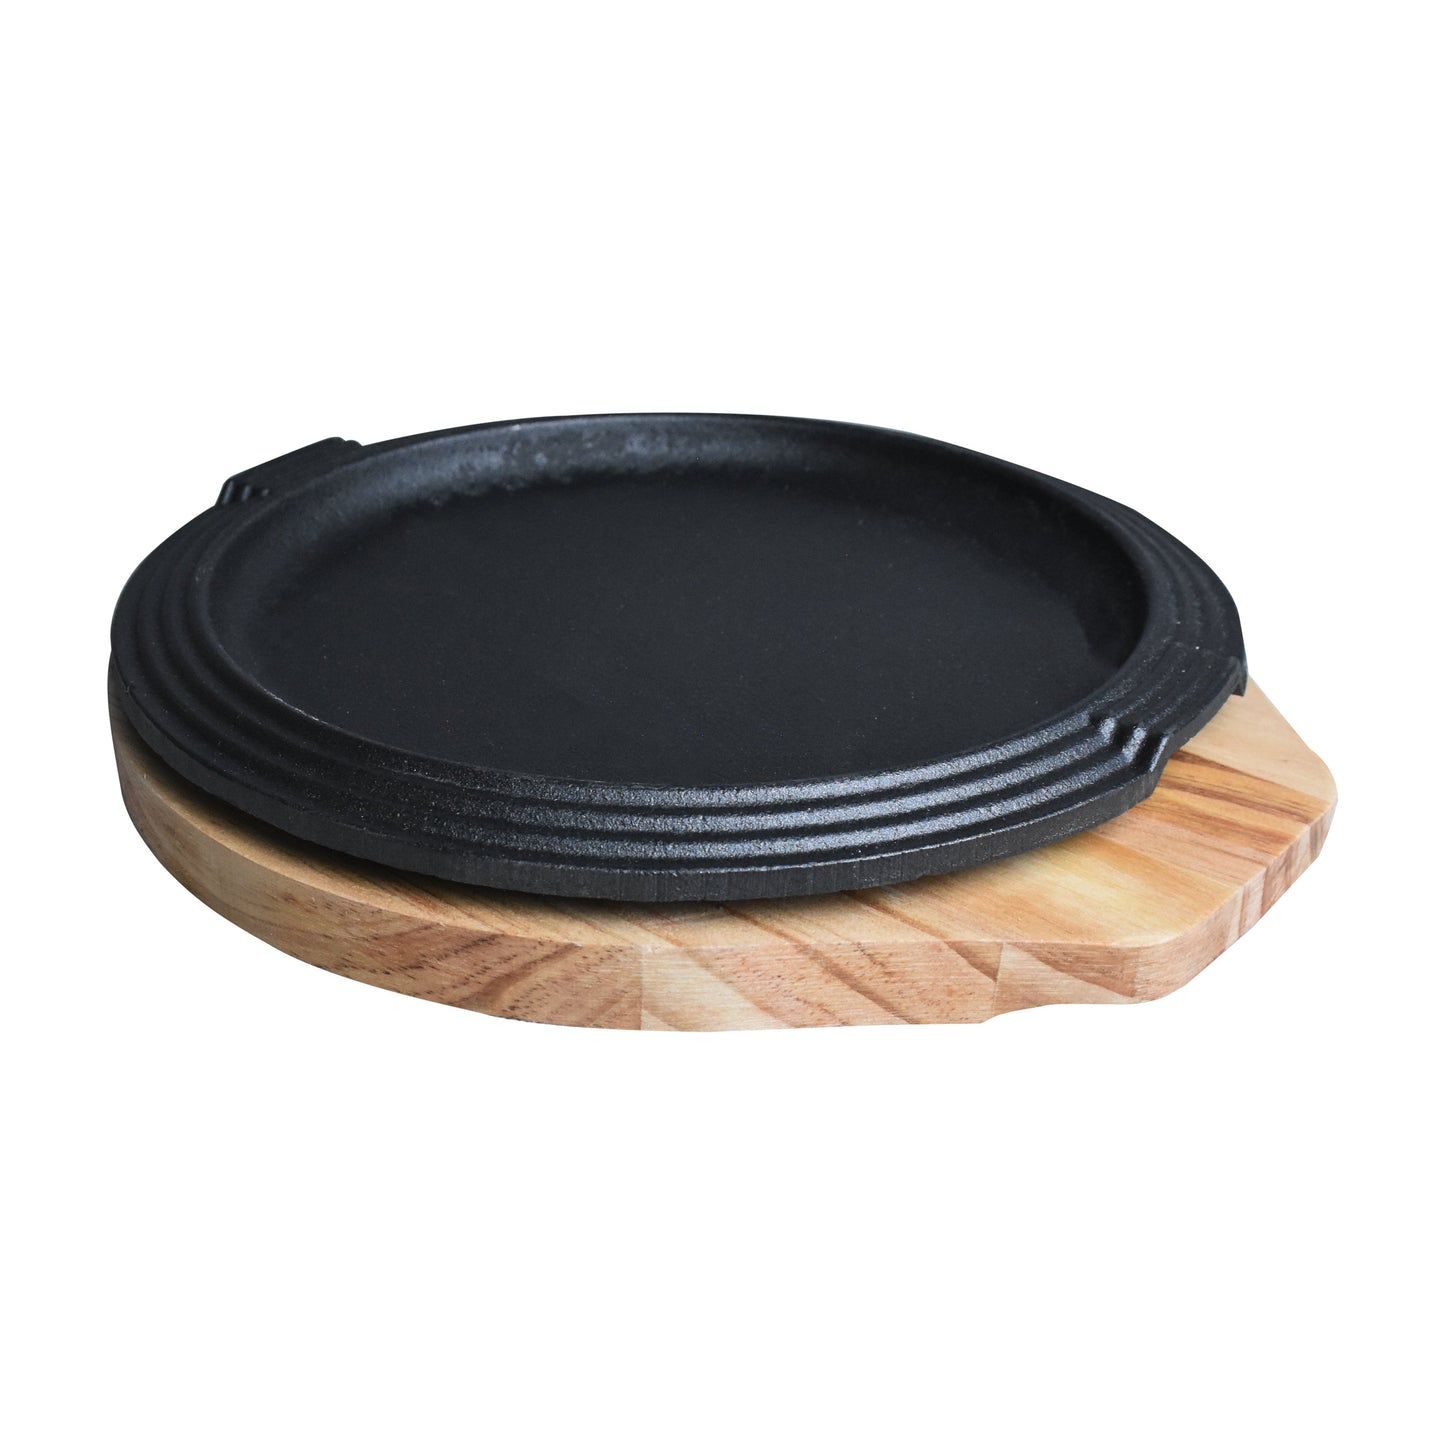 Round Cast Iron Sizzler Plate 19cm With Wooden Base